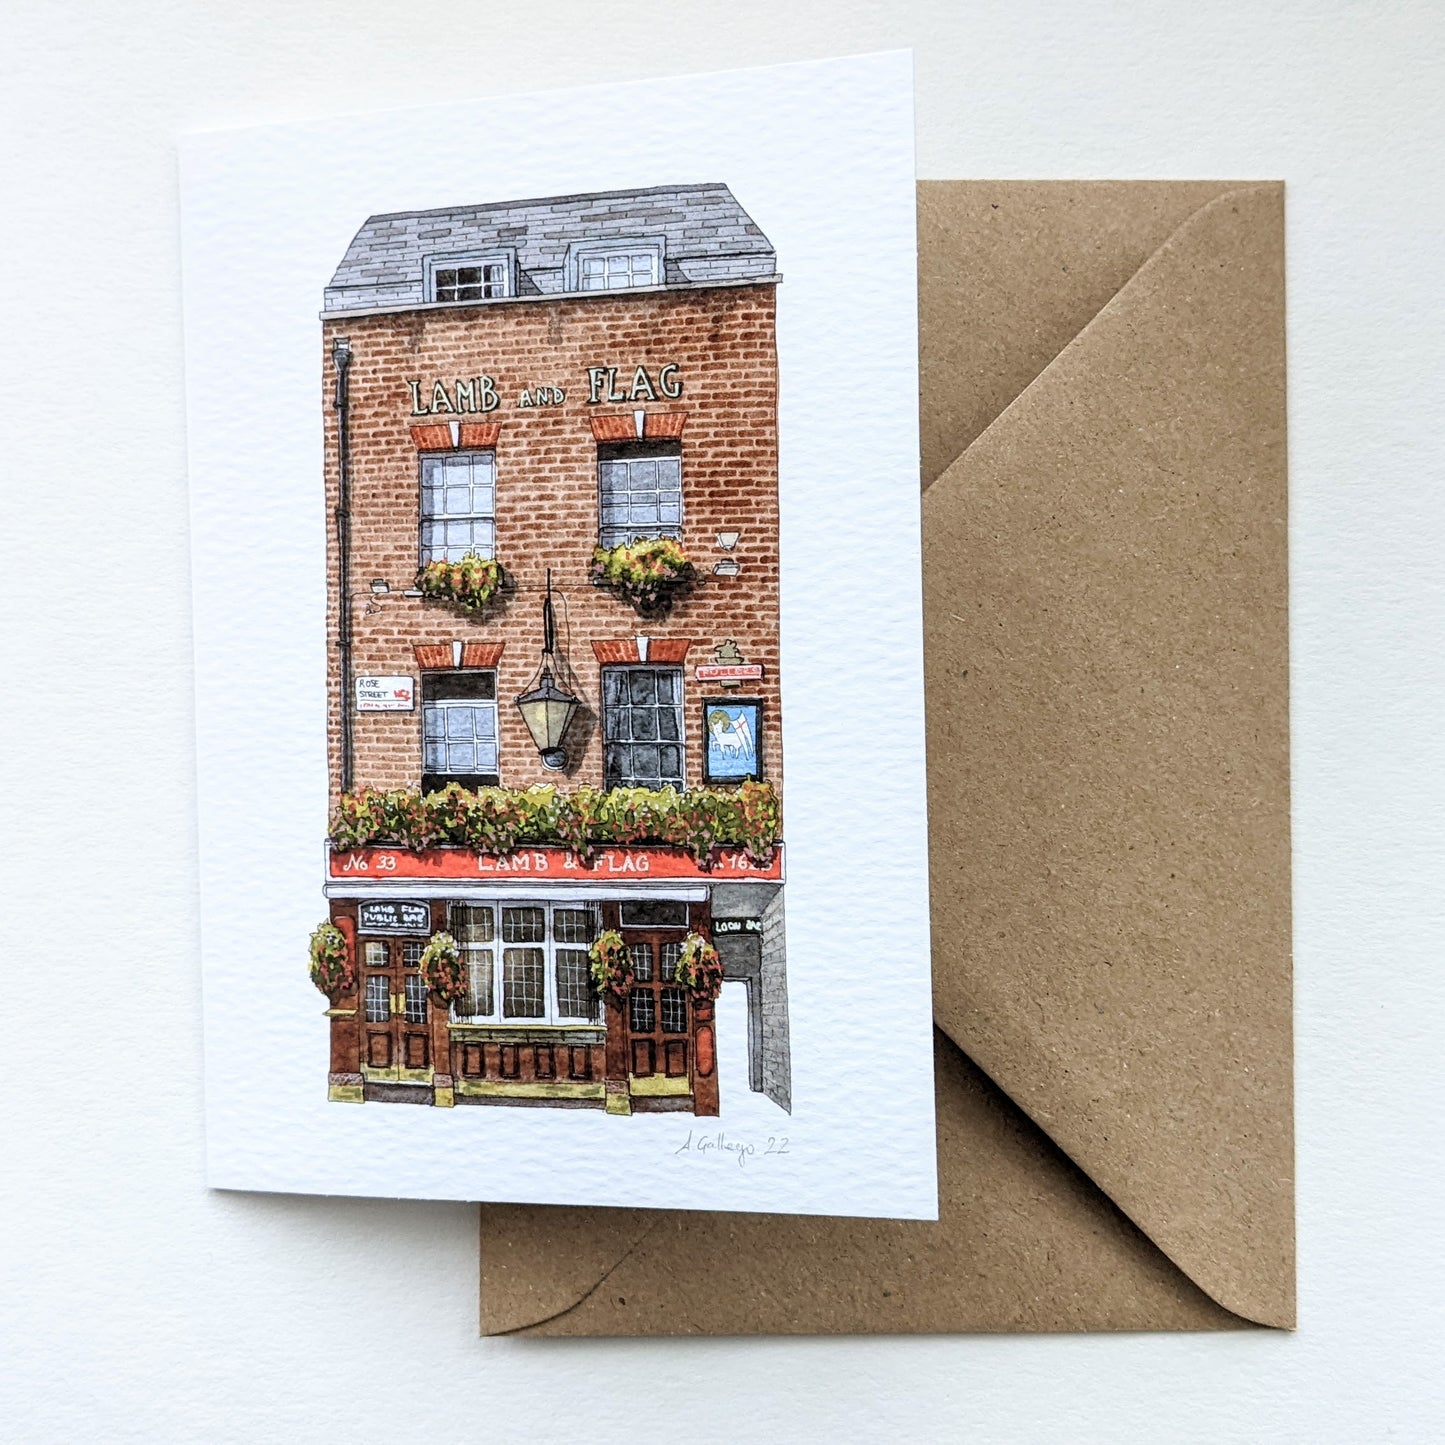 Covent Garden - Lamb & Flag pub - Greeting card with envelope